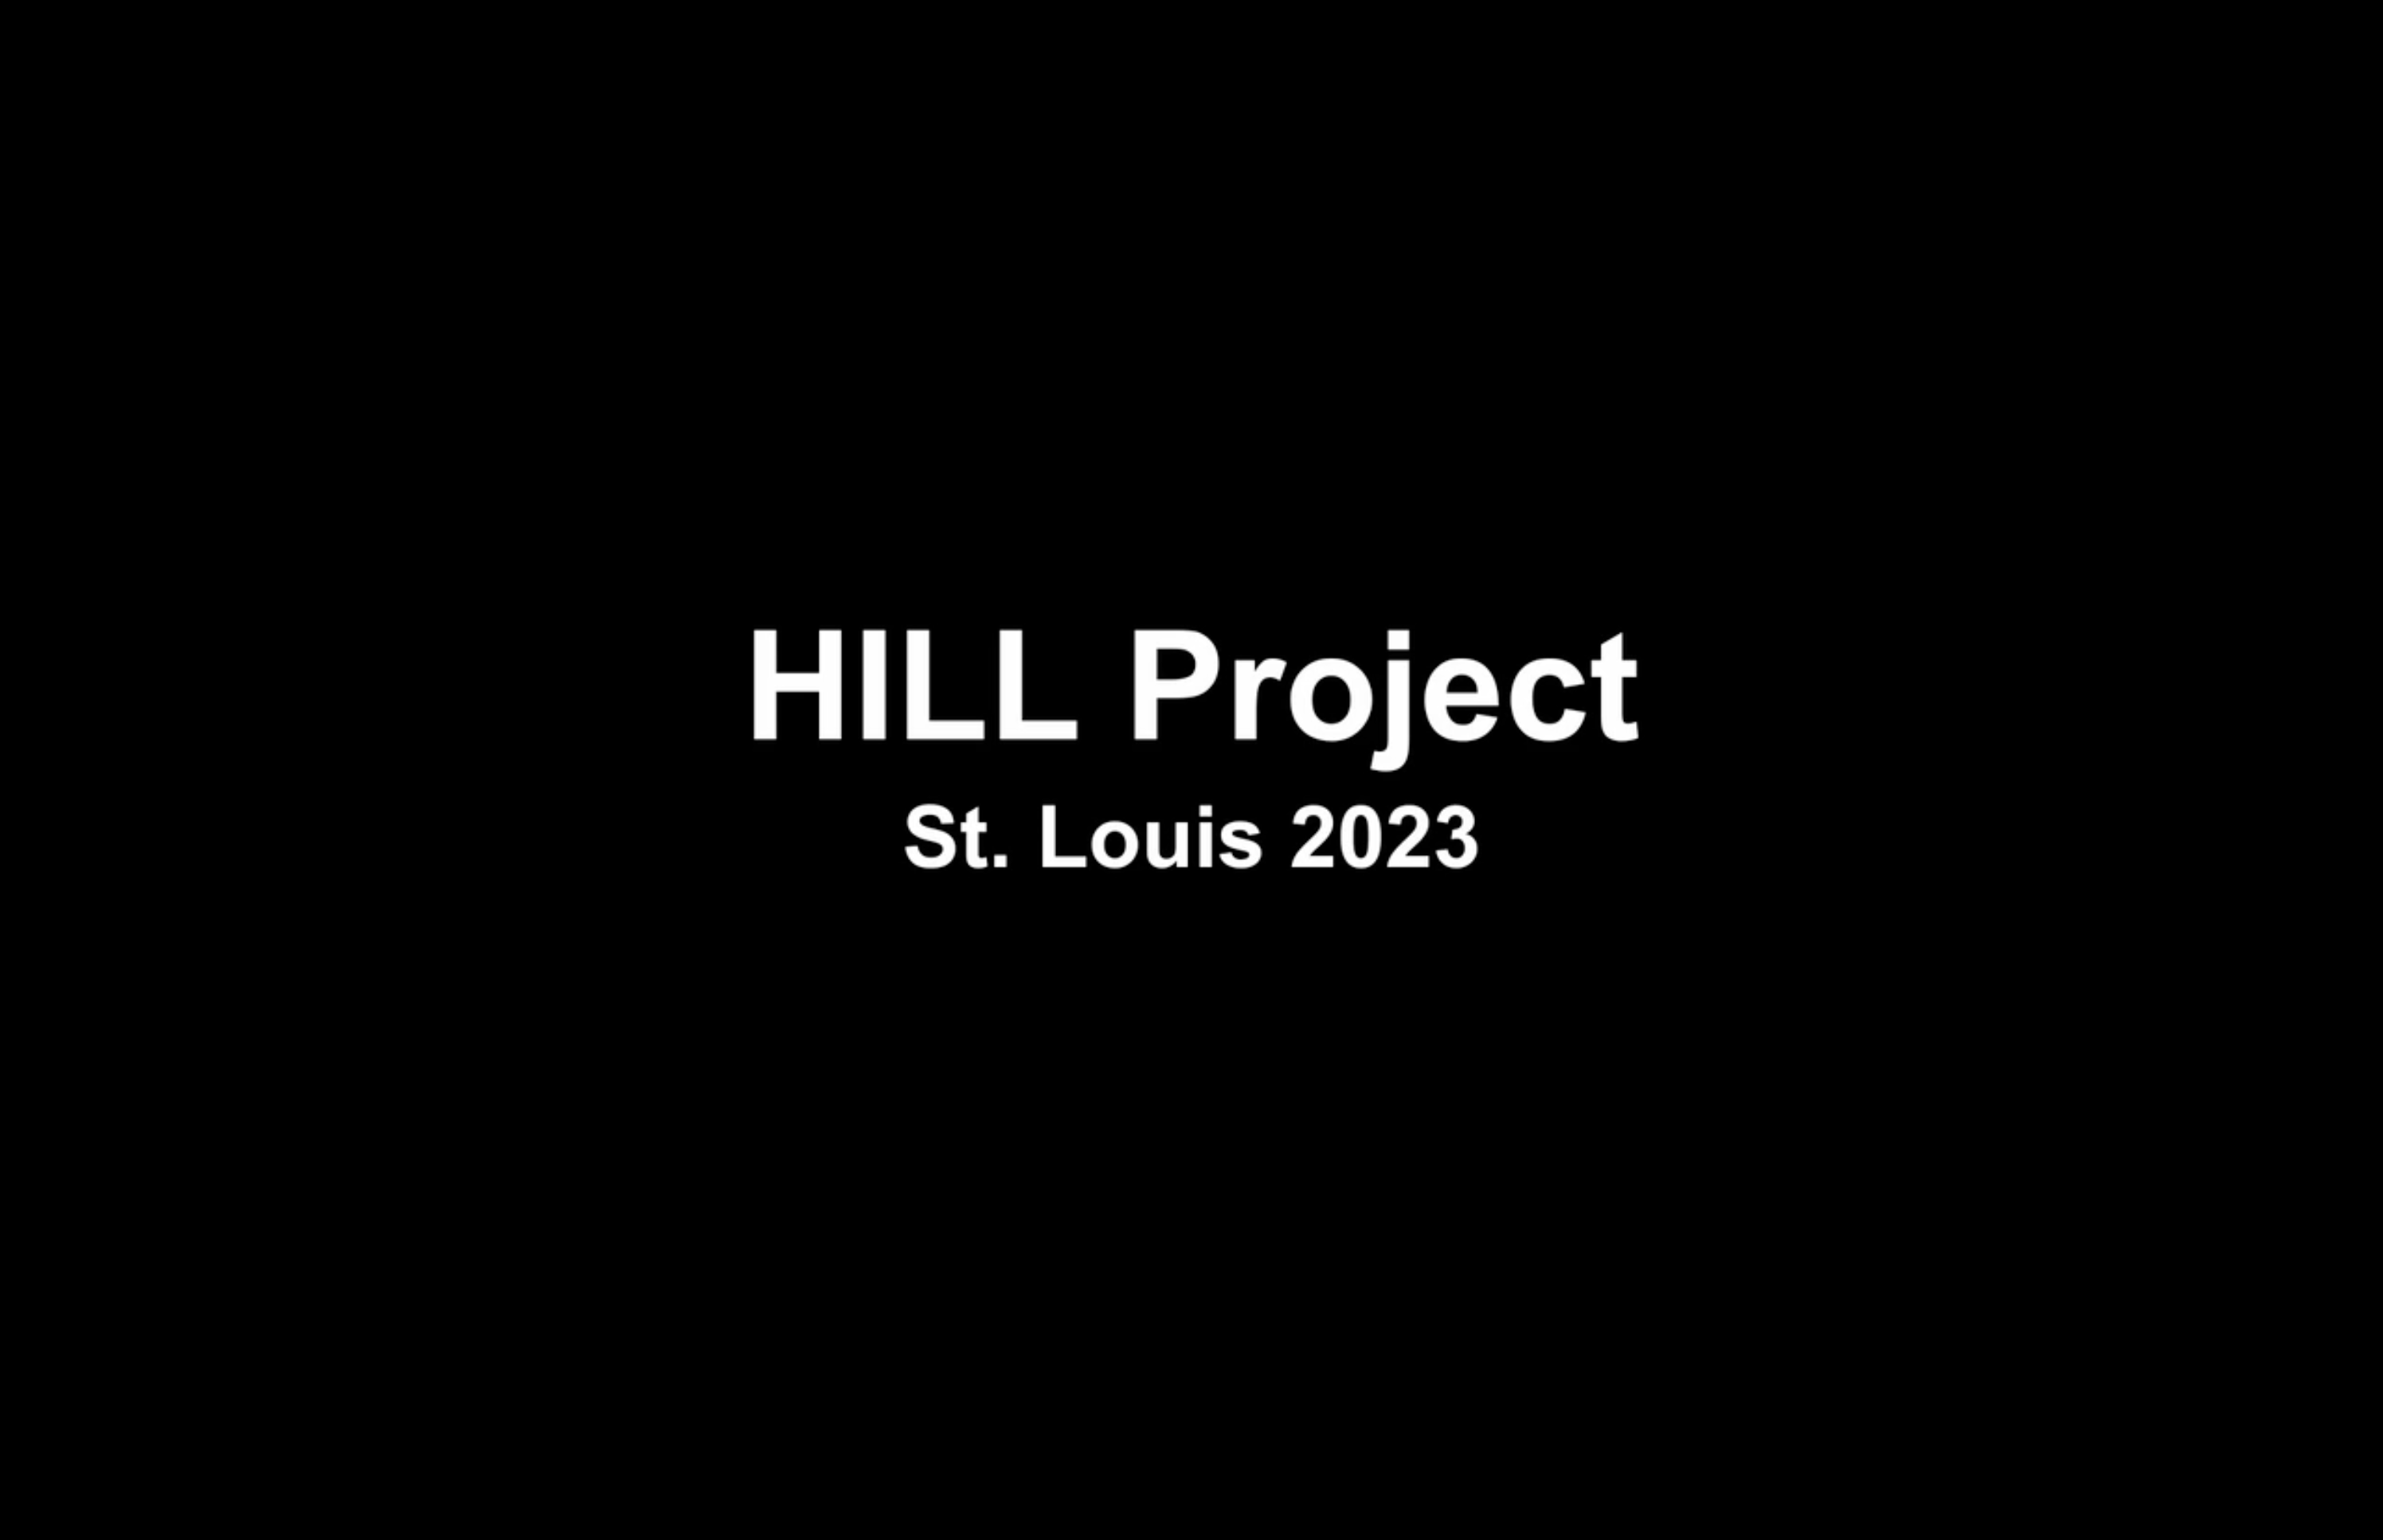 St. Louis 2023 On-Site Reflections